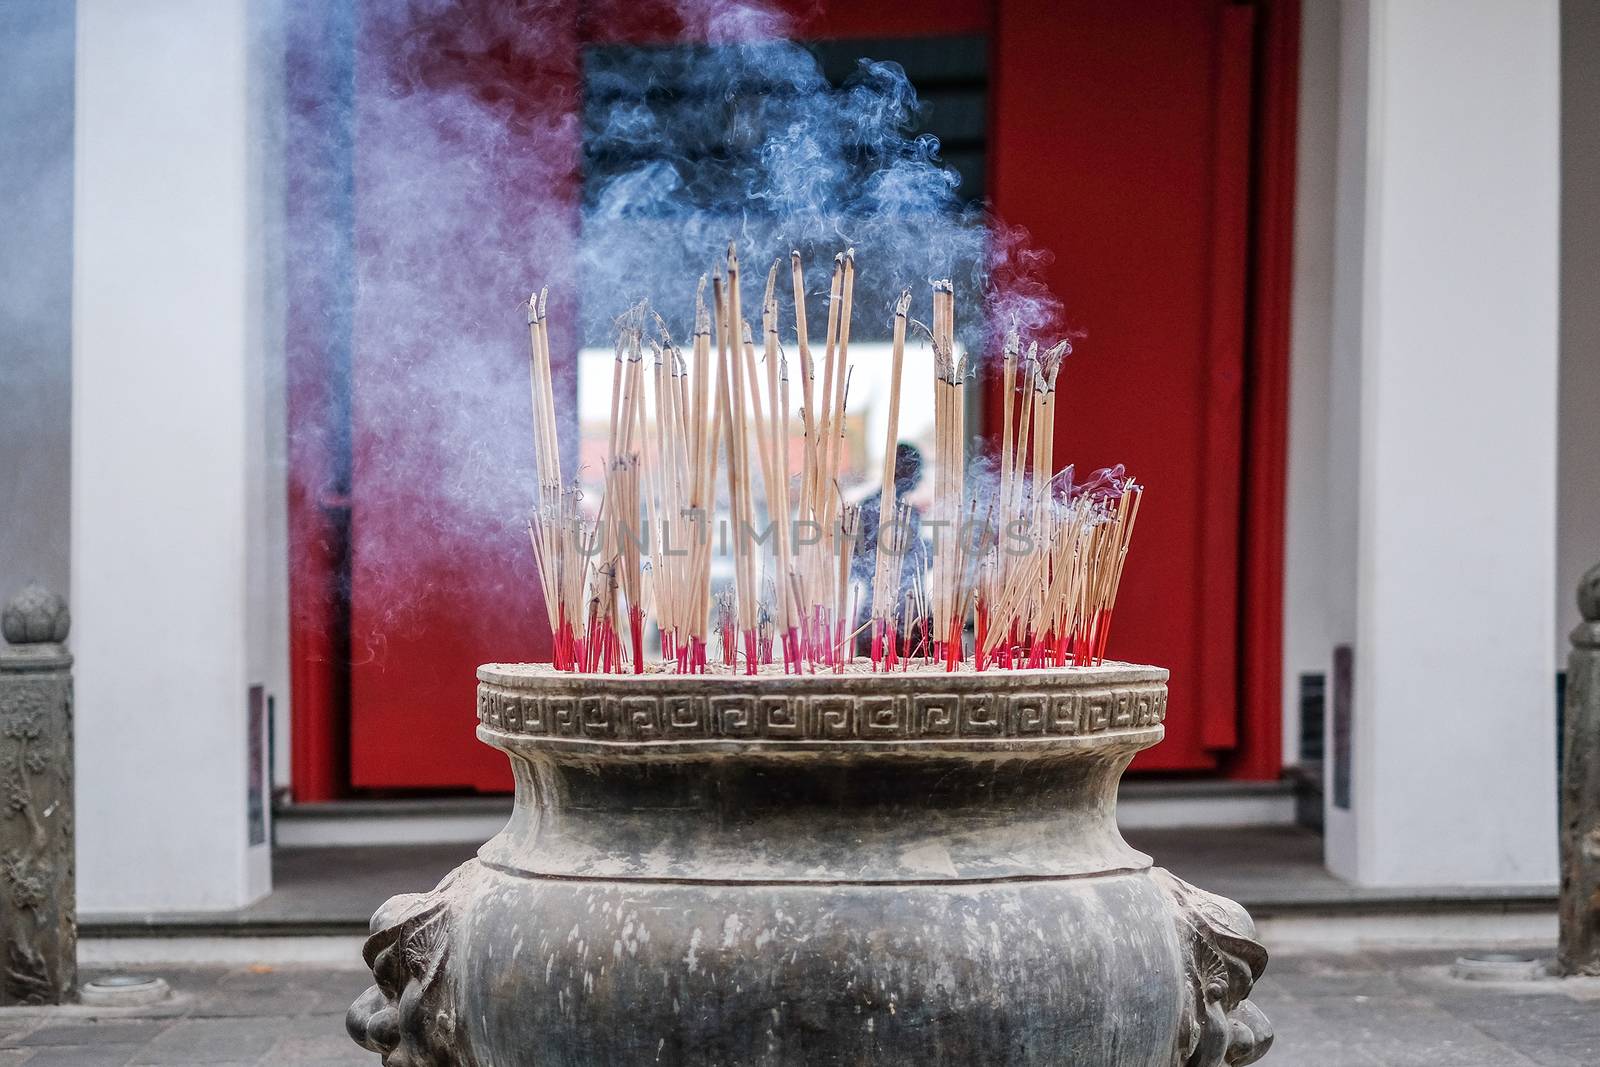 Incense sticks in ashes bucket in Temple Thialand by Surasak